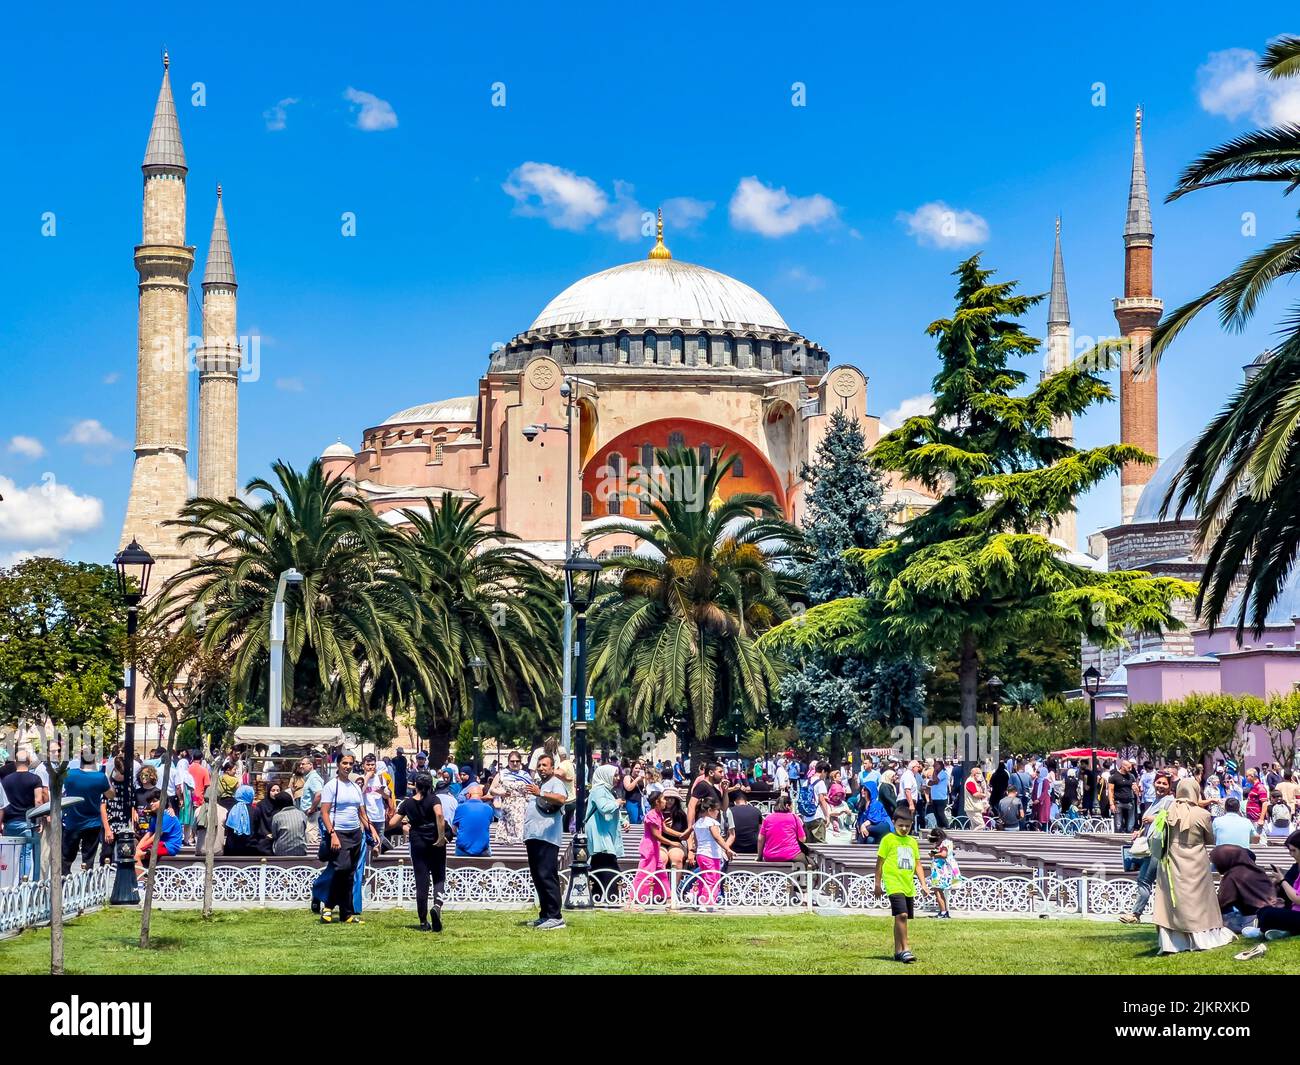 Istanbul Turkey - July 14, 2022: The magnificent and beautiful Hagia Sophia church, museum, mosque visited by international tourist crowds. Sunny day Stock Photo